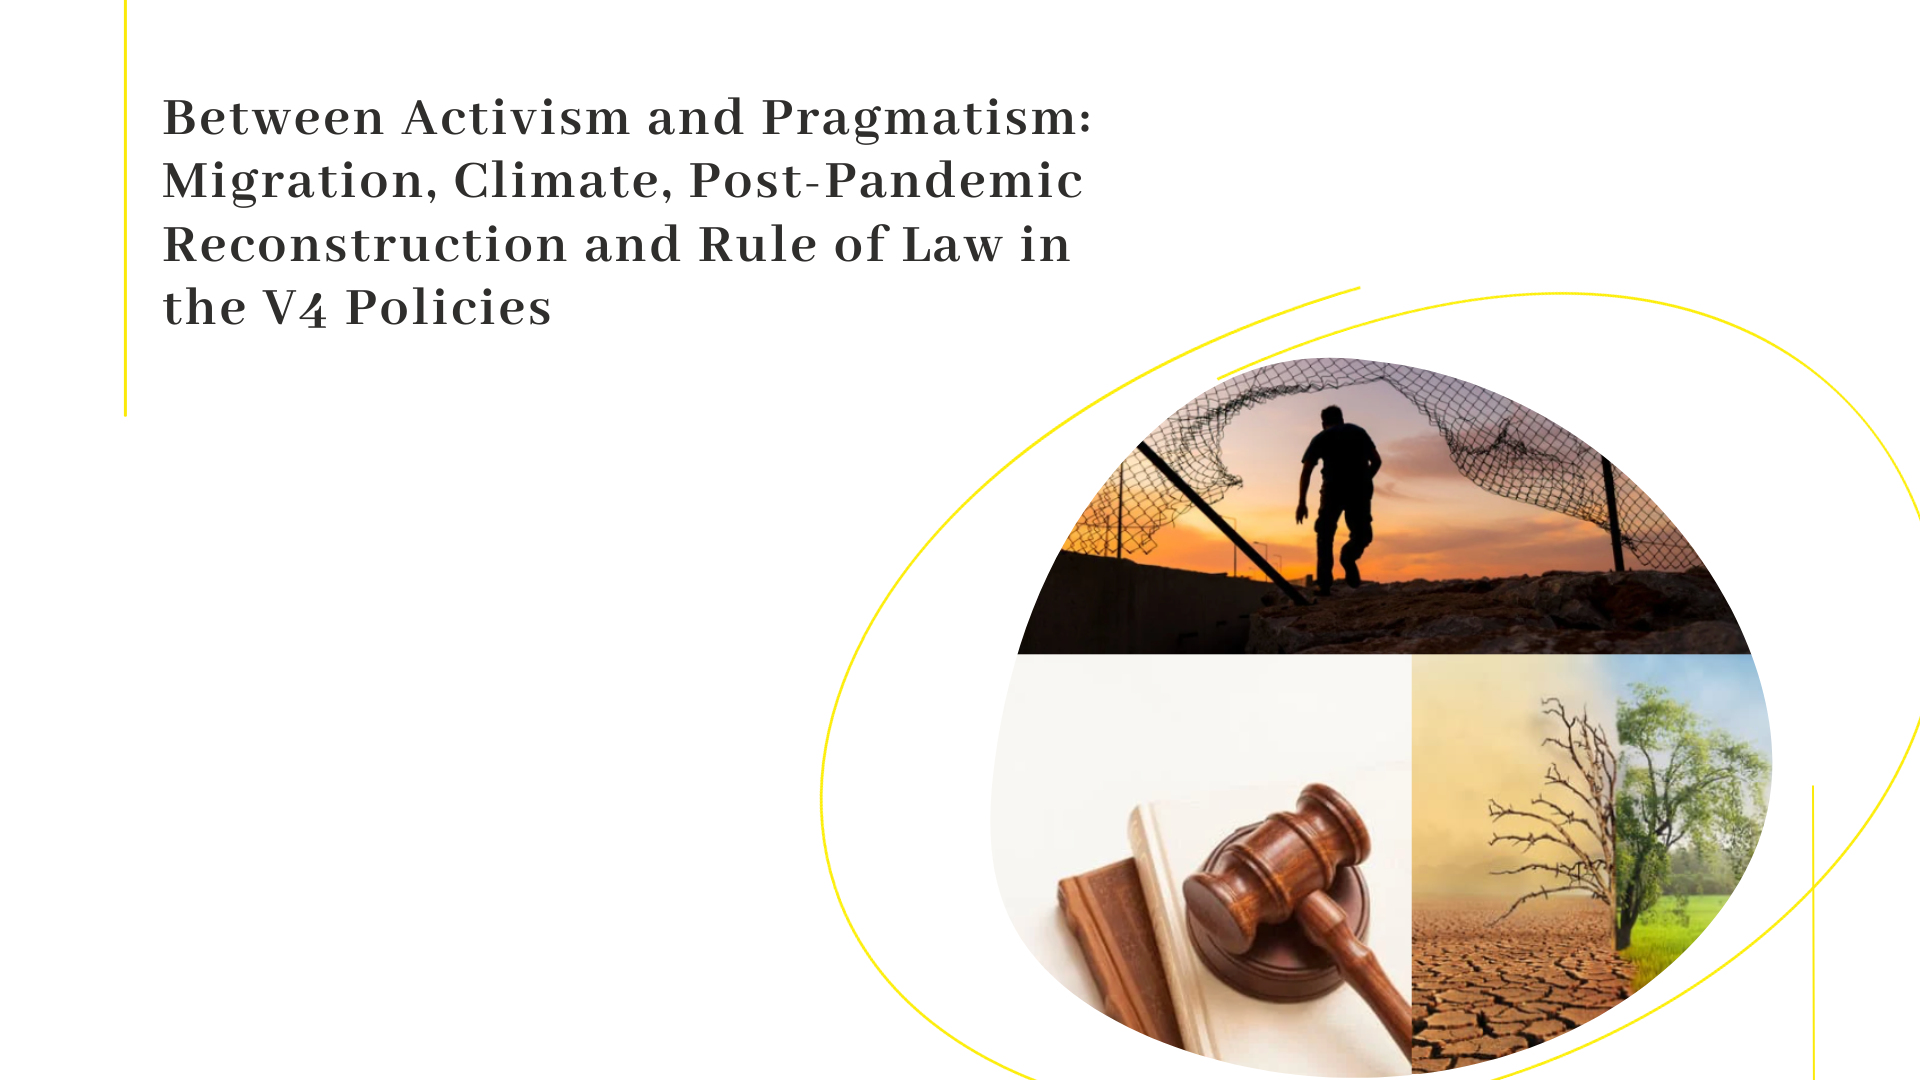 Between Activism and Pragmatism: Migration, Climate, Post-Pandemic Reconstruction and Rule of Law in the V4 Policies